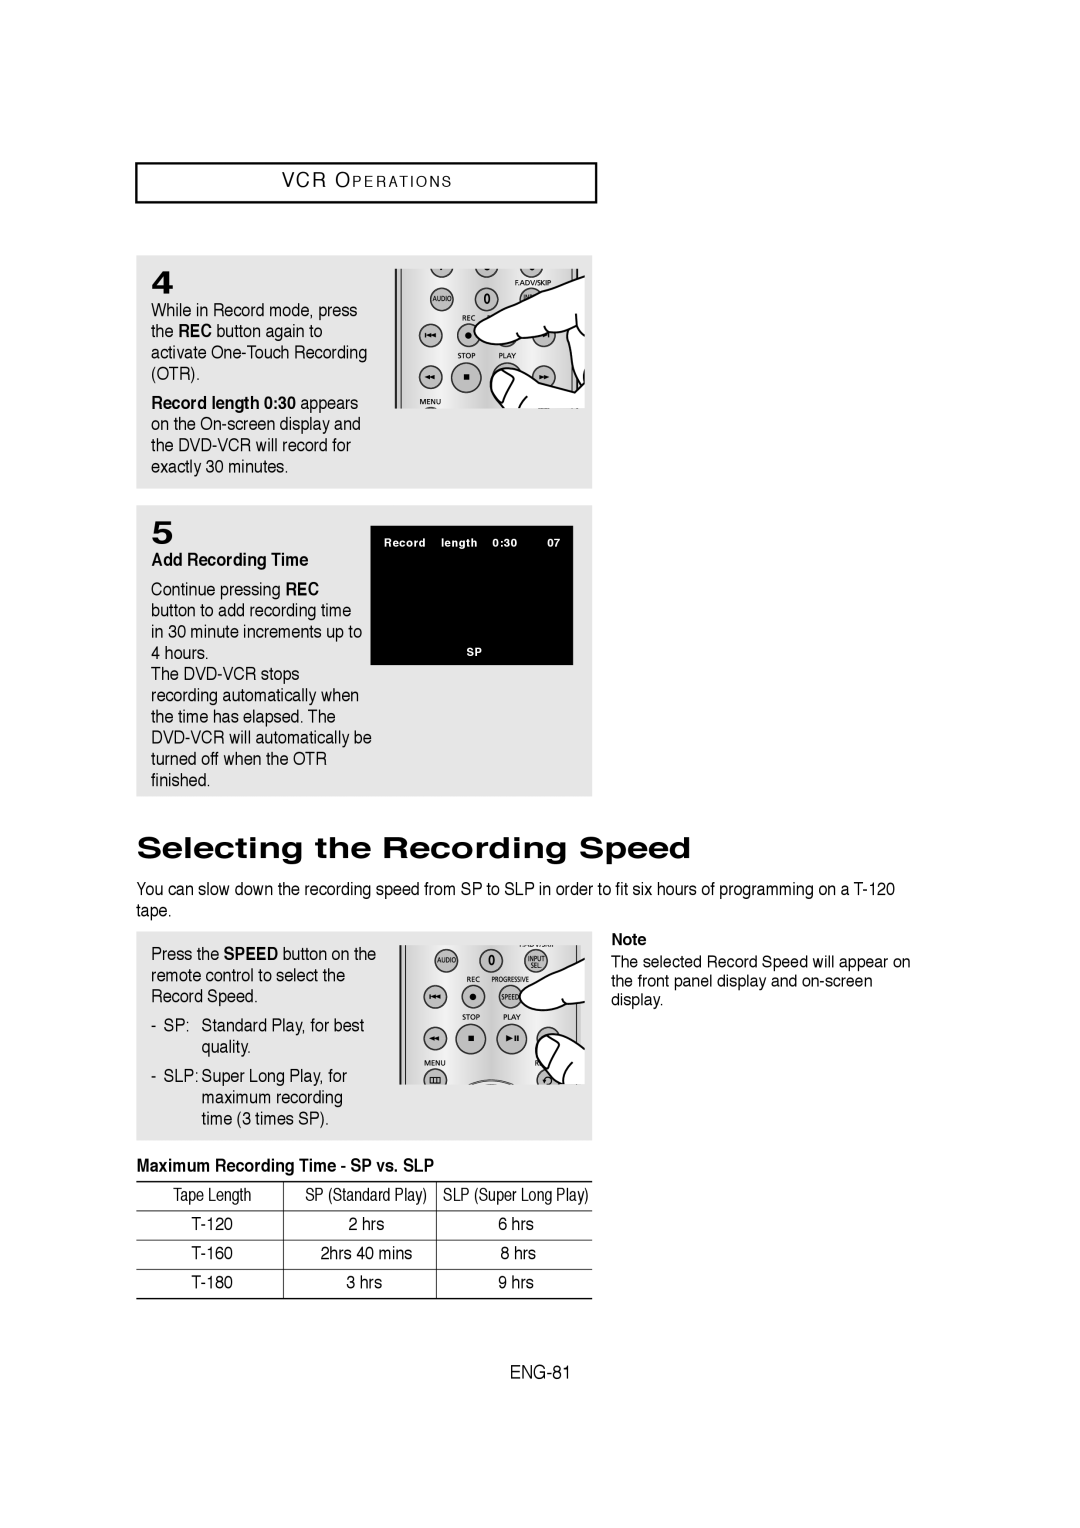 Samsung AK68-01304A Selecting the Recording Speed, ENG-81, Add Recording Time, Maximum Recording Time - SP vs. SLP 